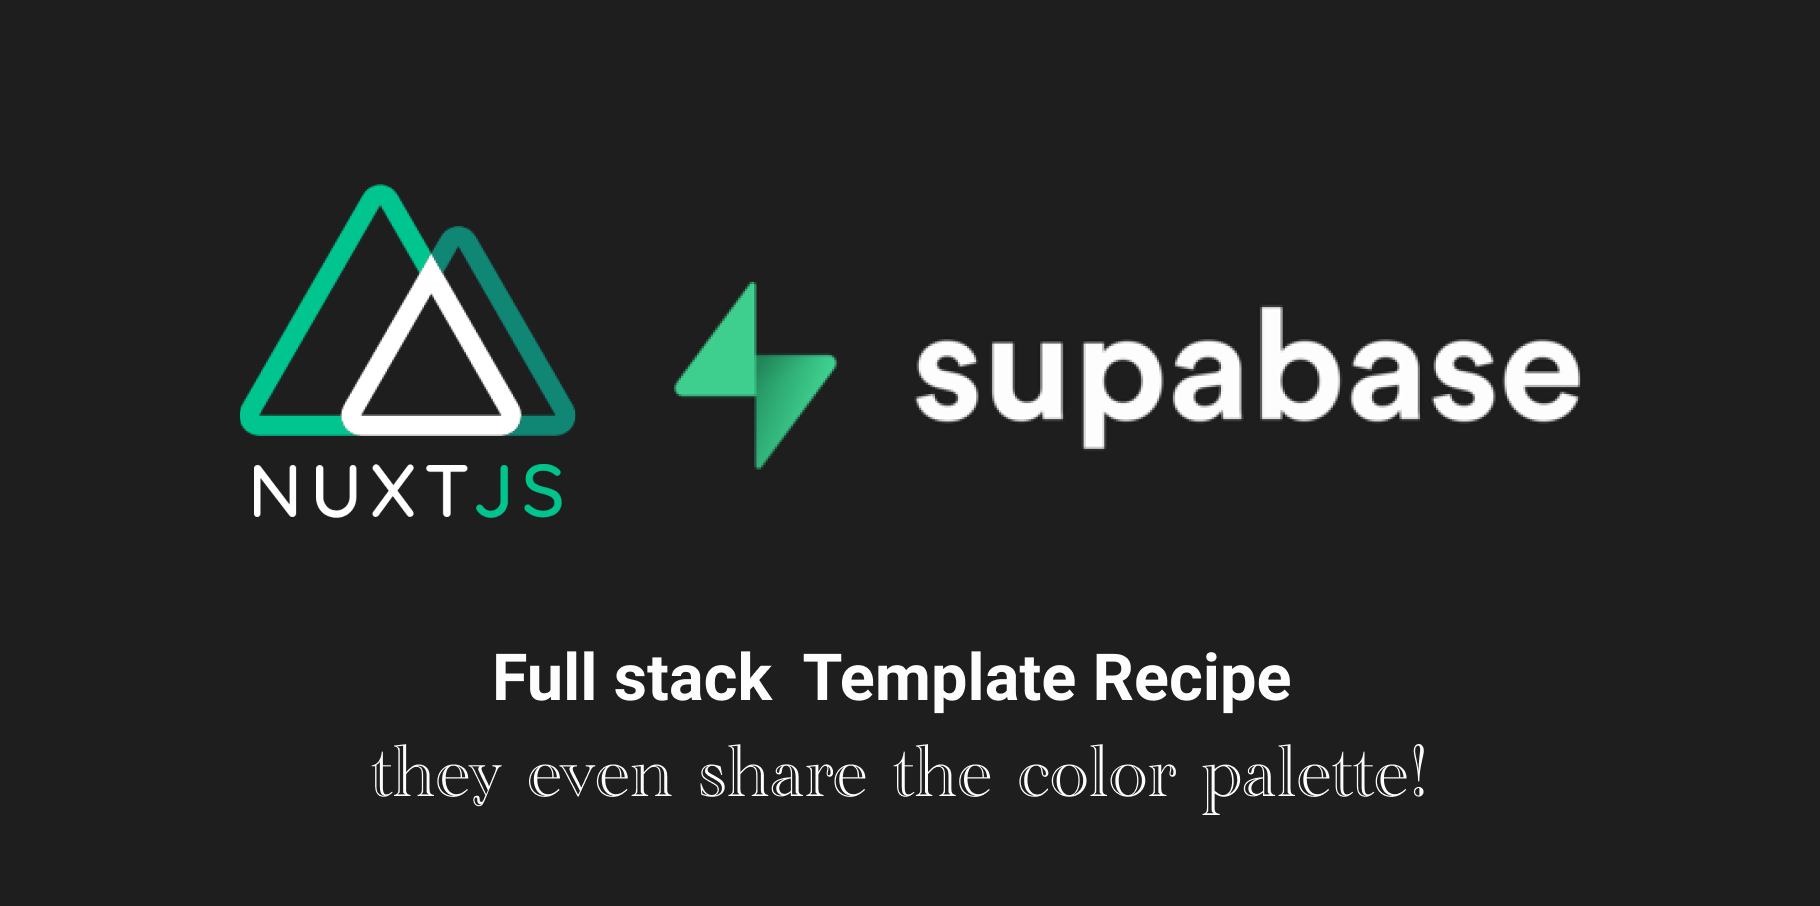 Full-stack template recipe with Nuxt and Supabase